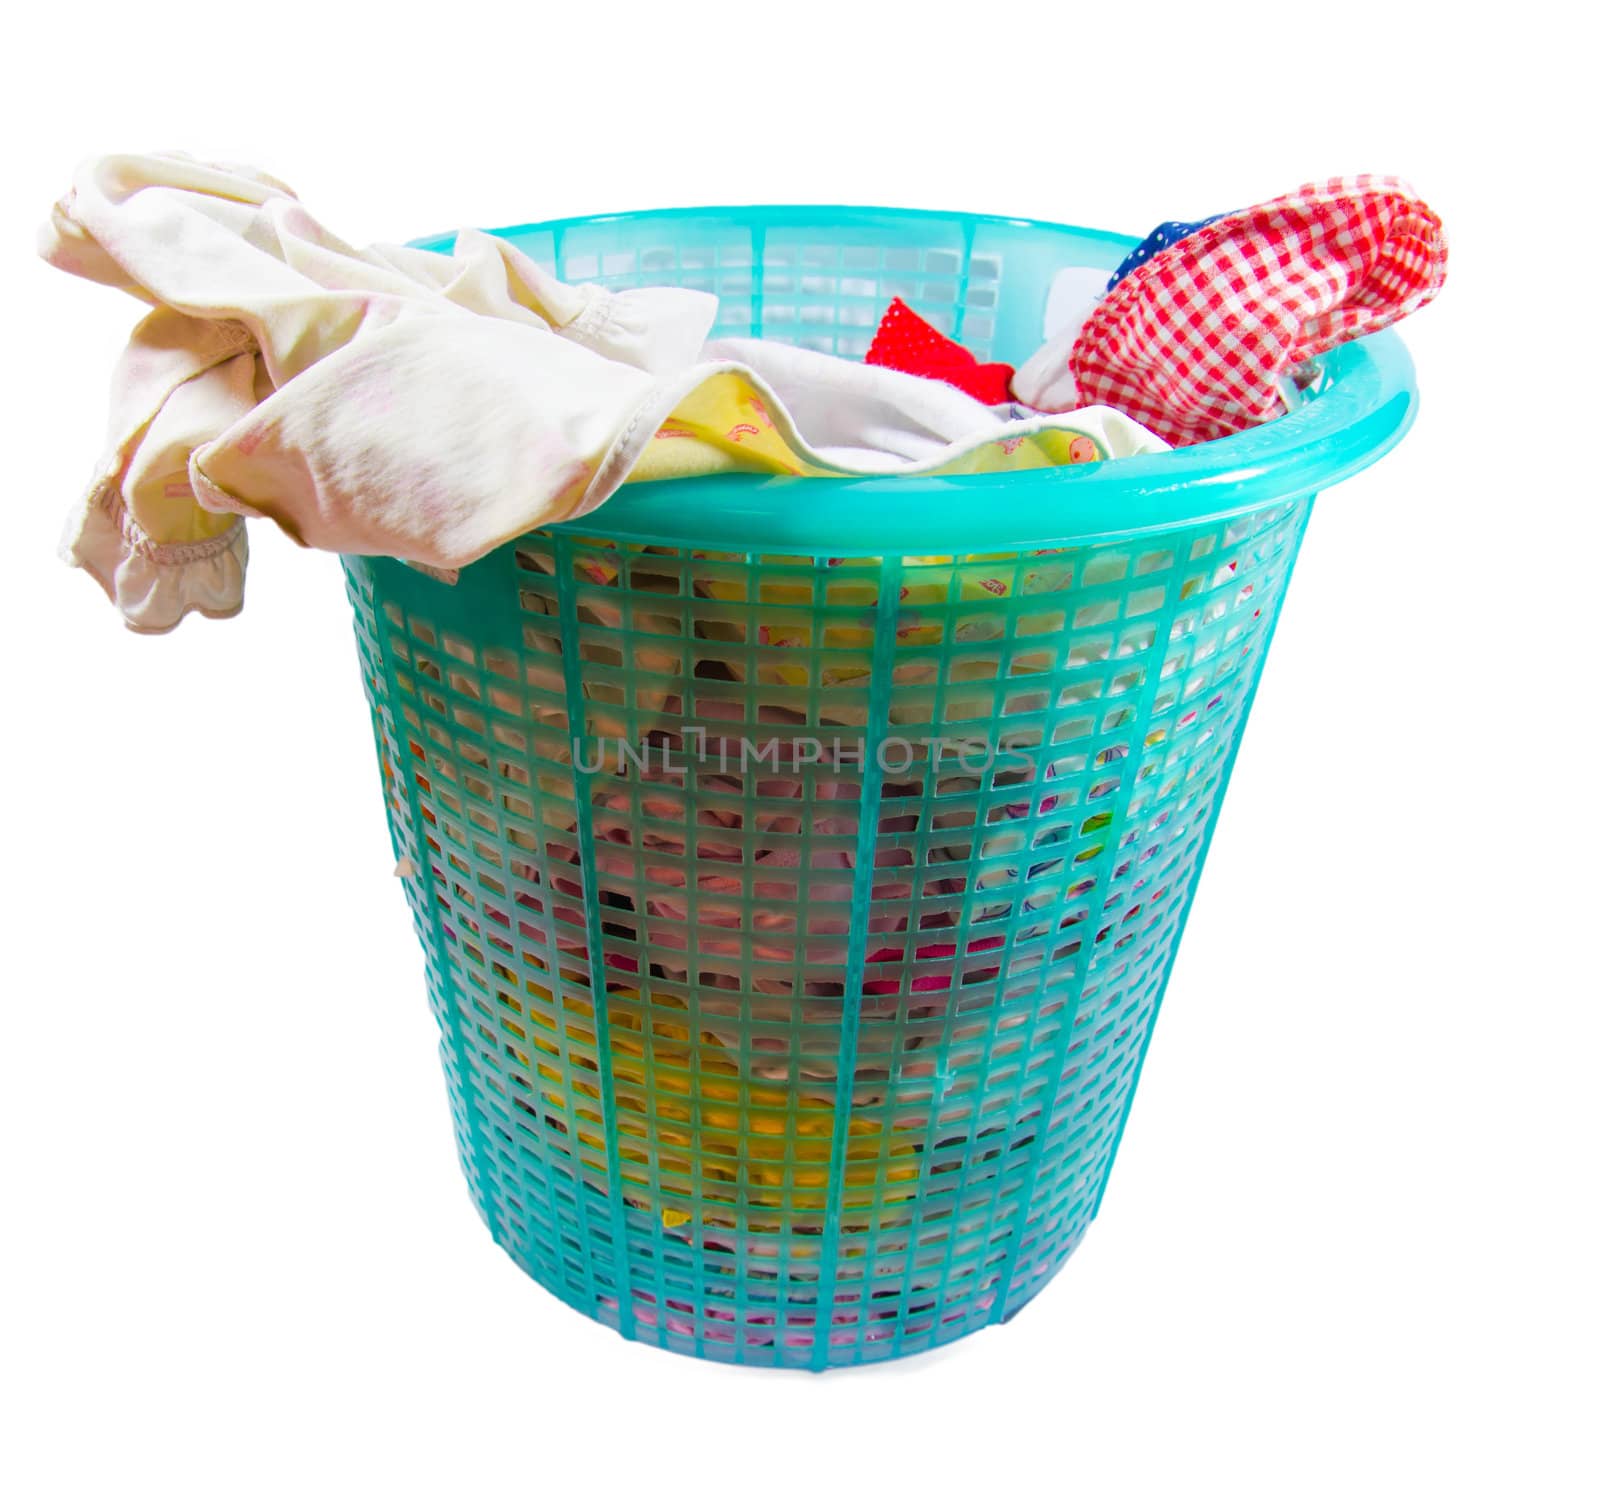 Clothes basket.
 by aoo3771